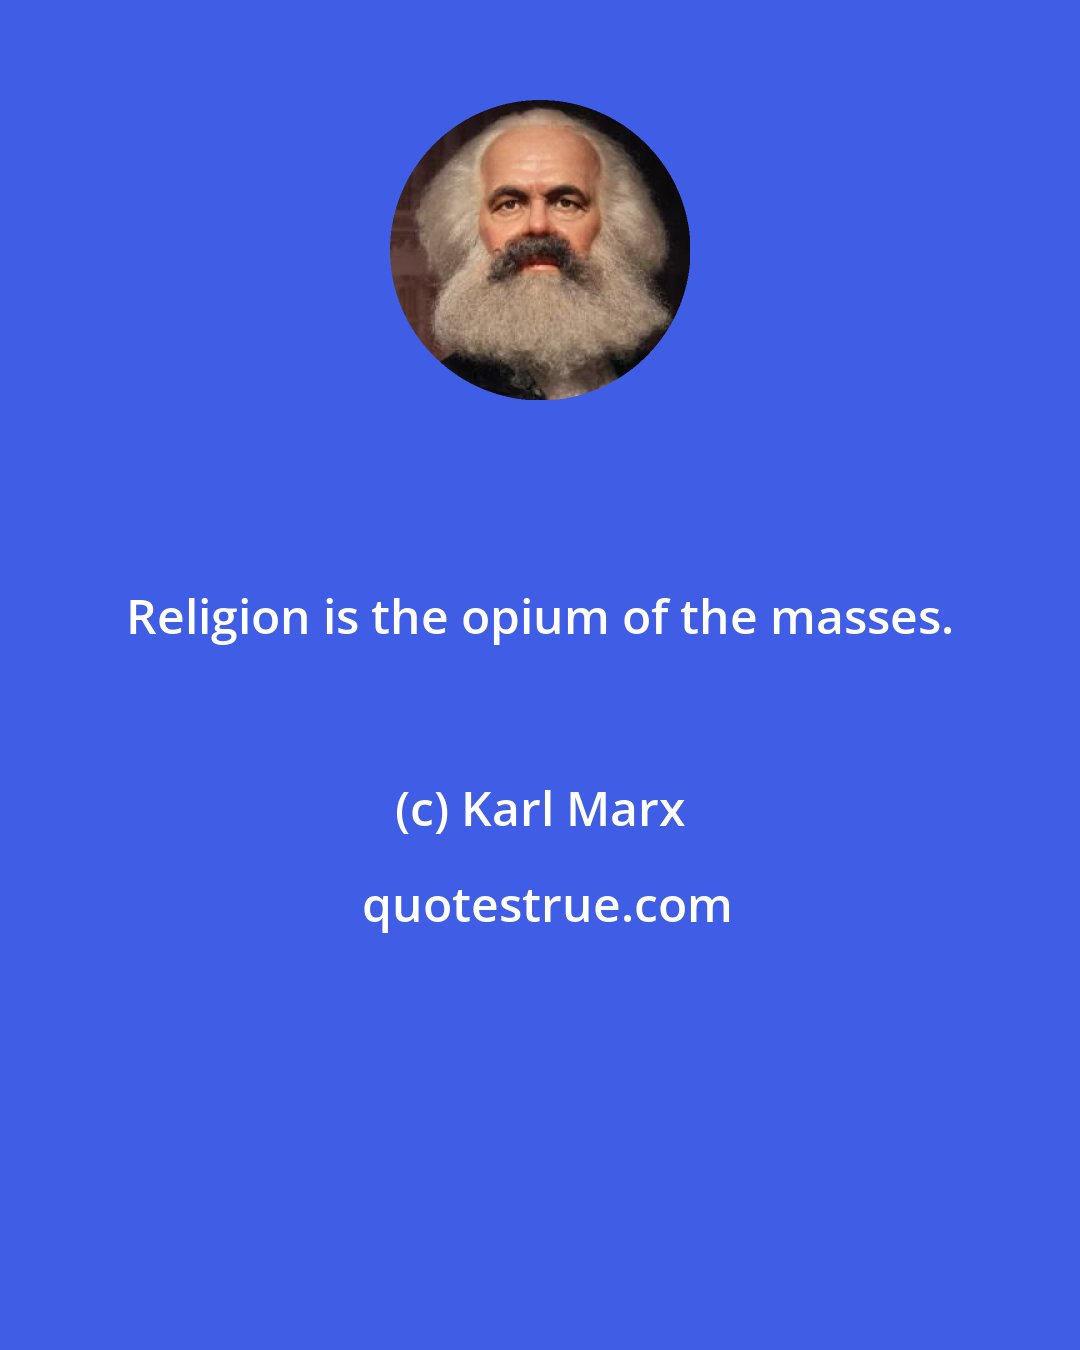 Karl Marx: Religion is the opium of the masses.